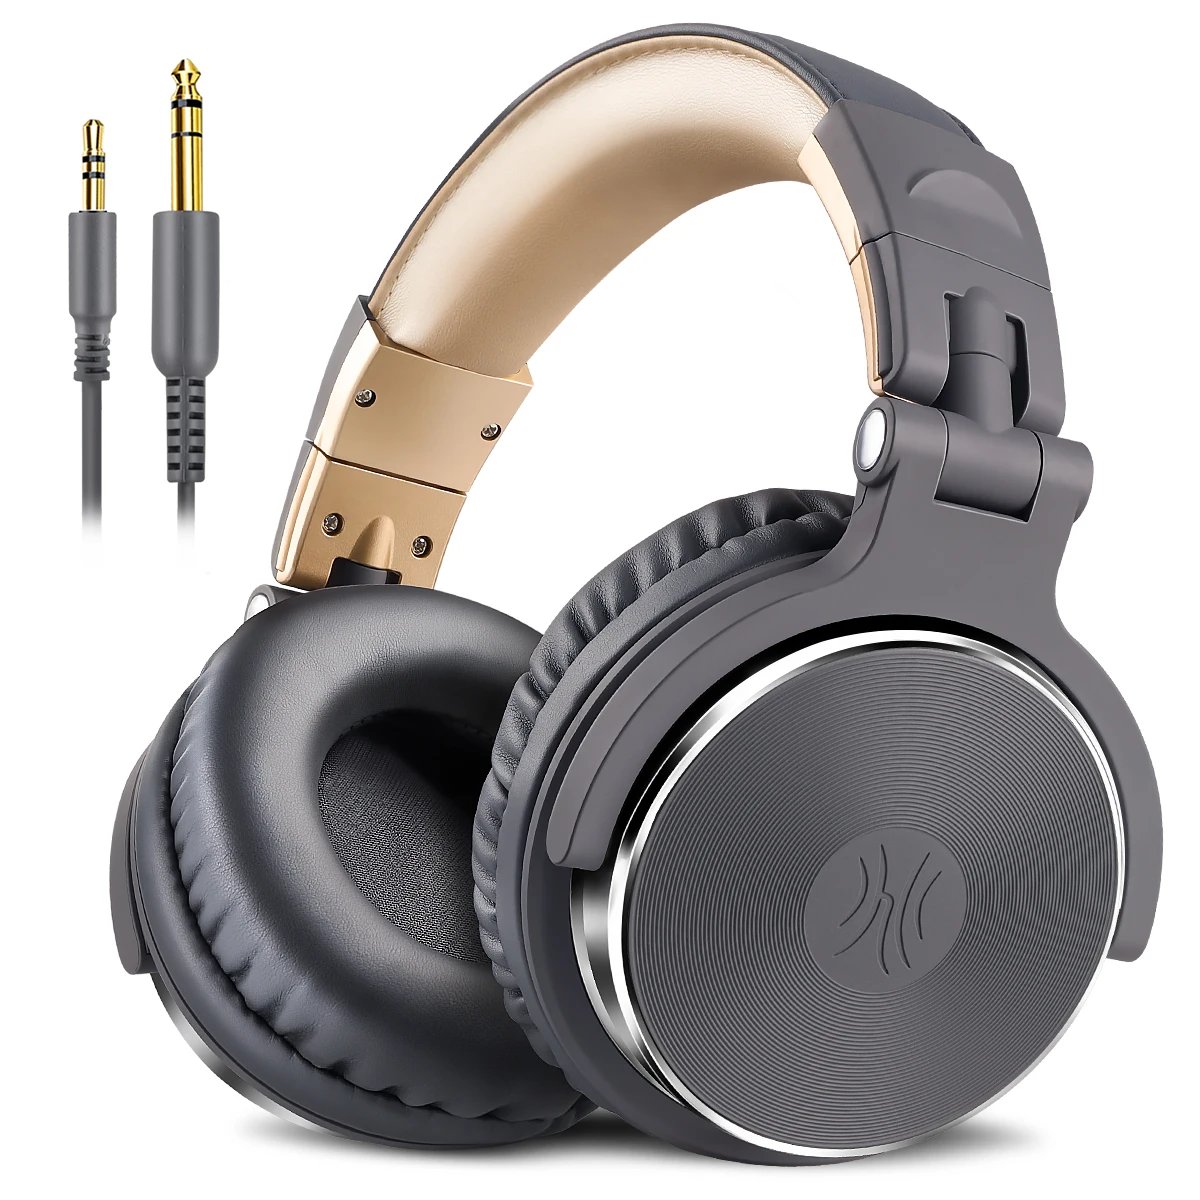 Oneodio Pro 10 Wired Over Ear Dj Headphones Hifi Studio Monitor Music  Gaming Wholesale Headphone For Phone Computer Pc With Mic - Buy Wholesale  Headphone,Oneodio,Earphone Headphon Product on Alibaba.com